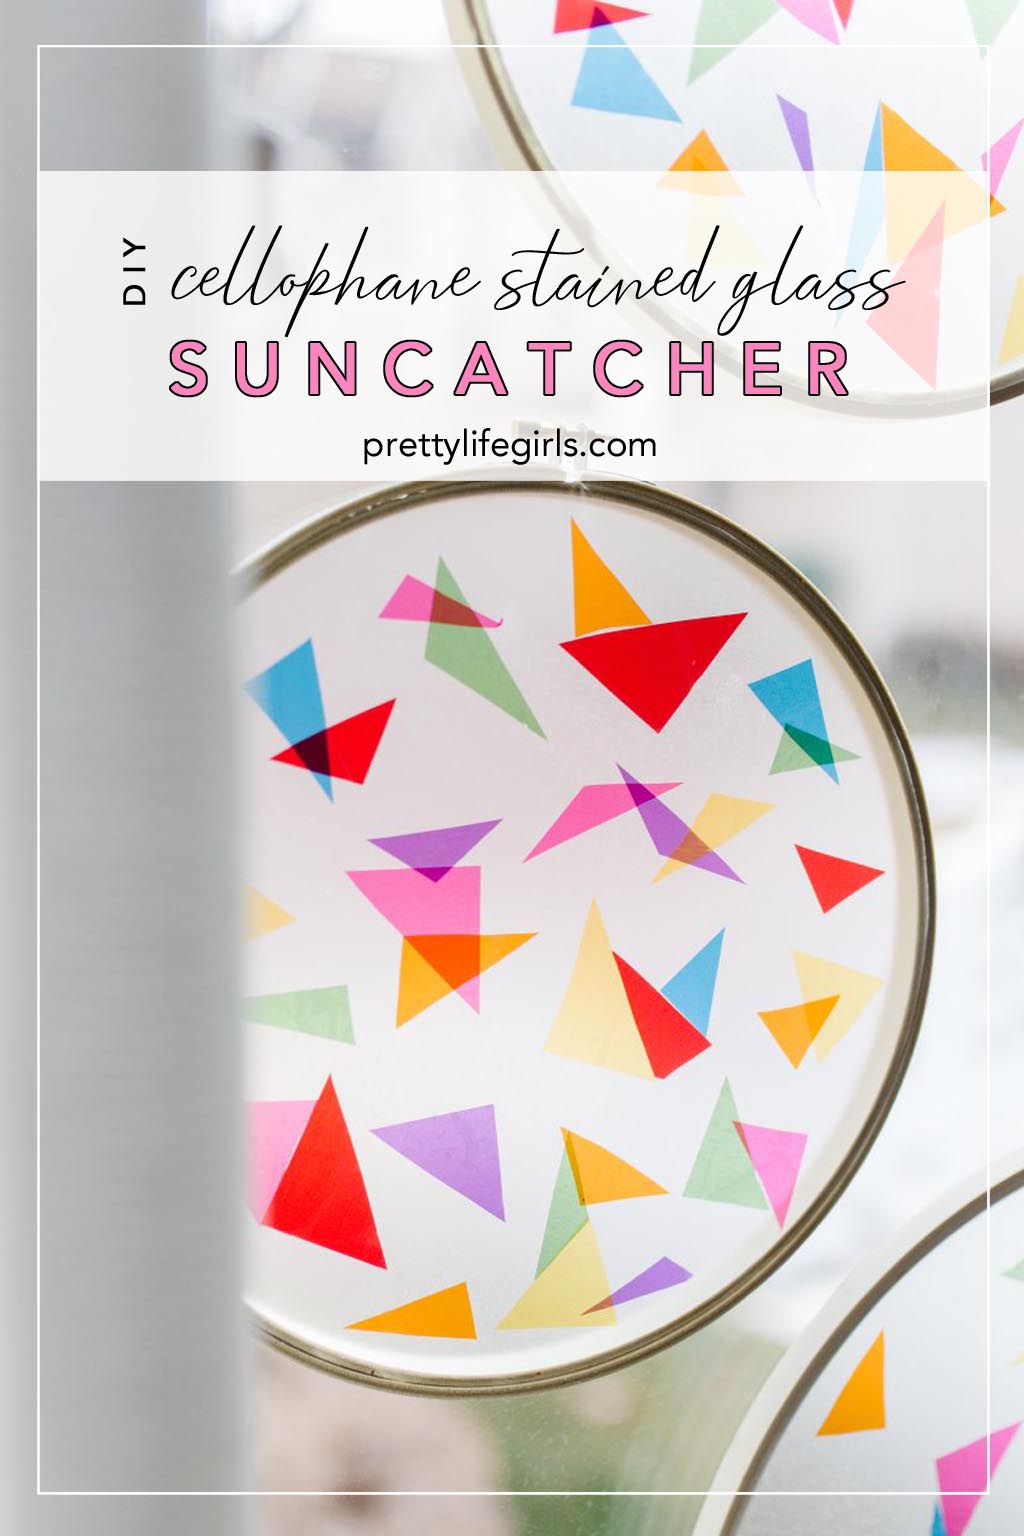 How to Make a DIY Stained Glass Suncatcher with Cellophane + a tutorial featured by the Pretty Life Girls